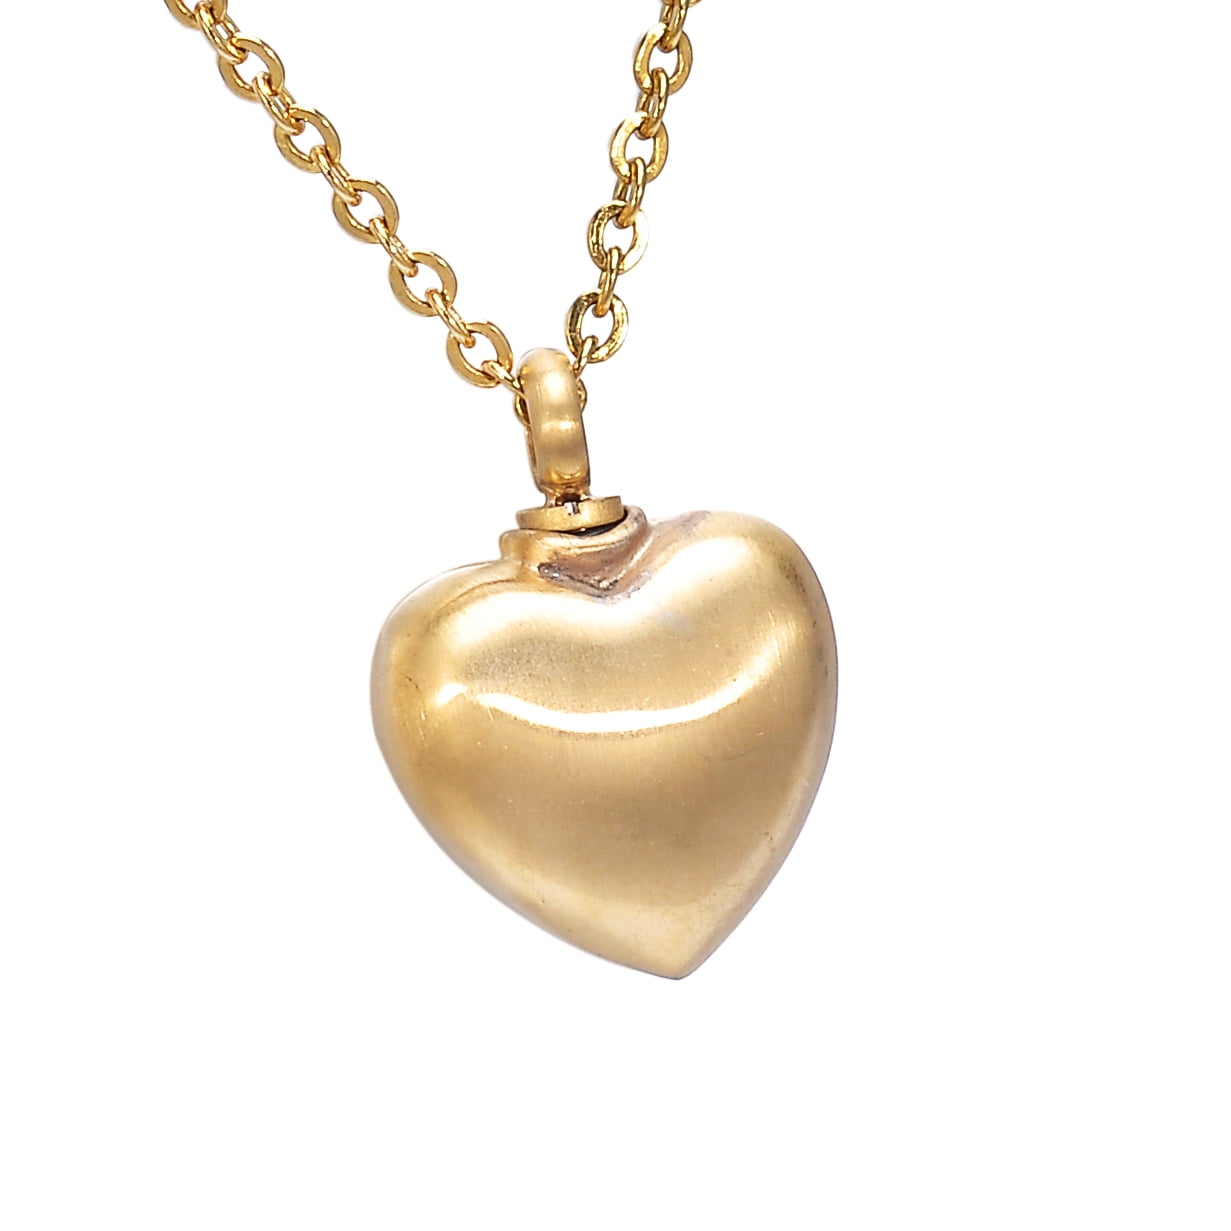 Gold-plated stainless steel heart Cremation Jewelry keepsakes Ashes ...